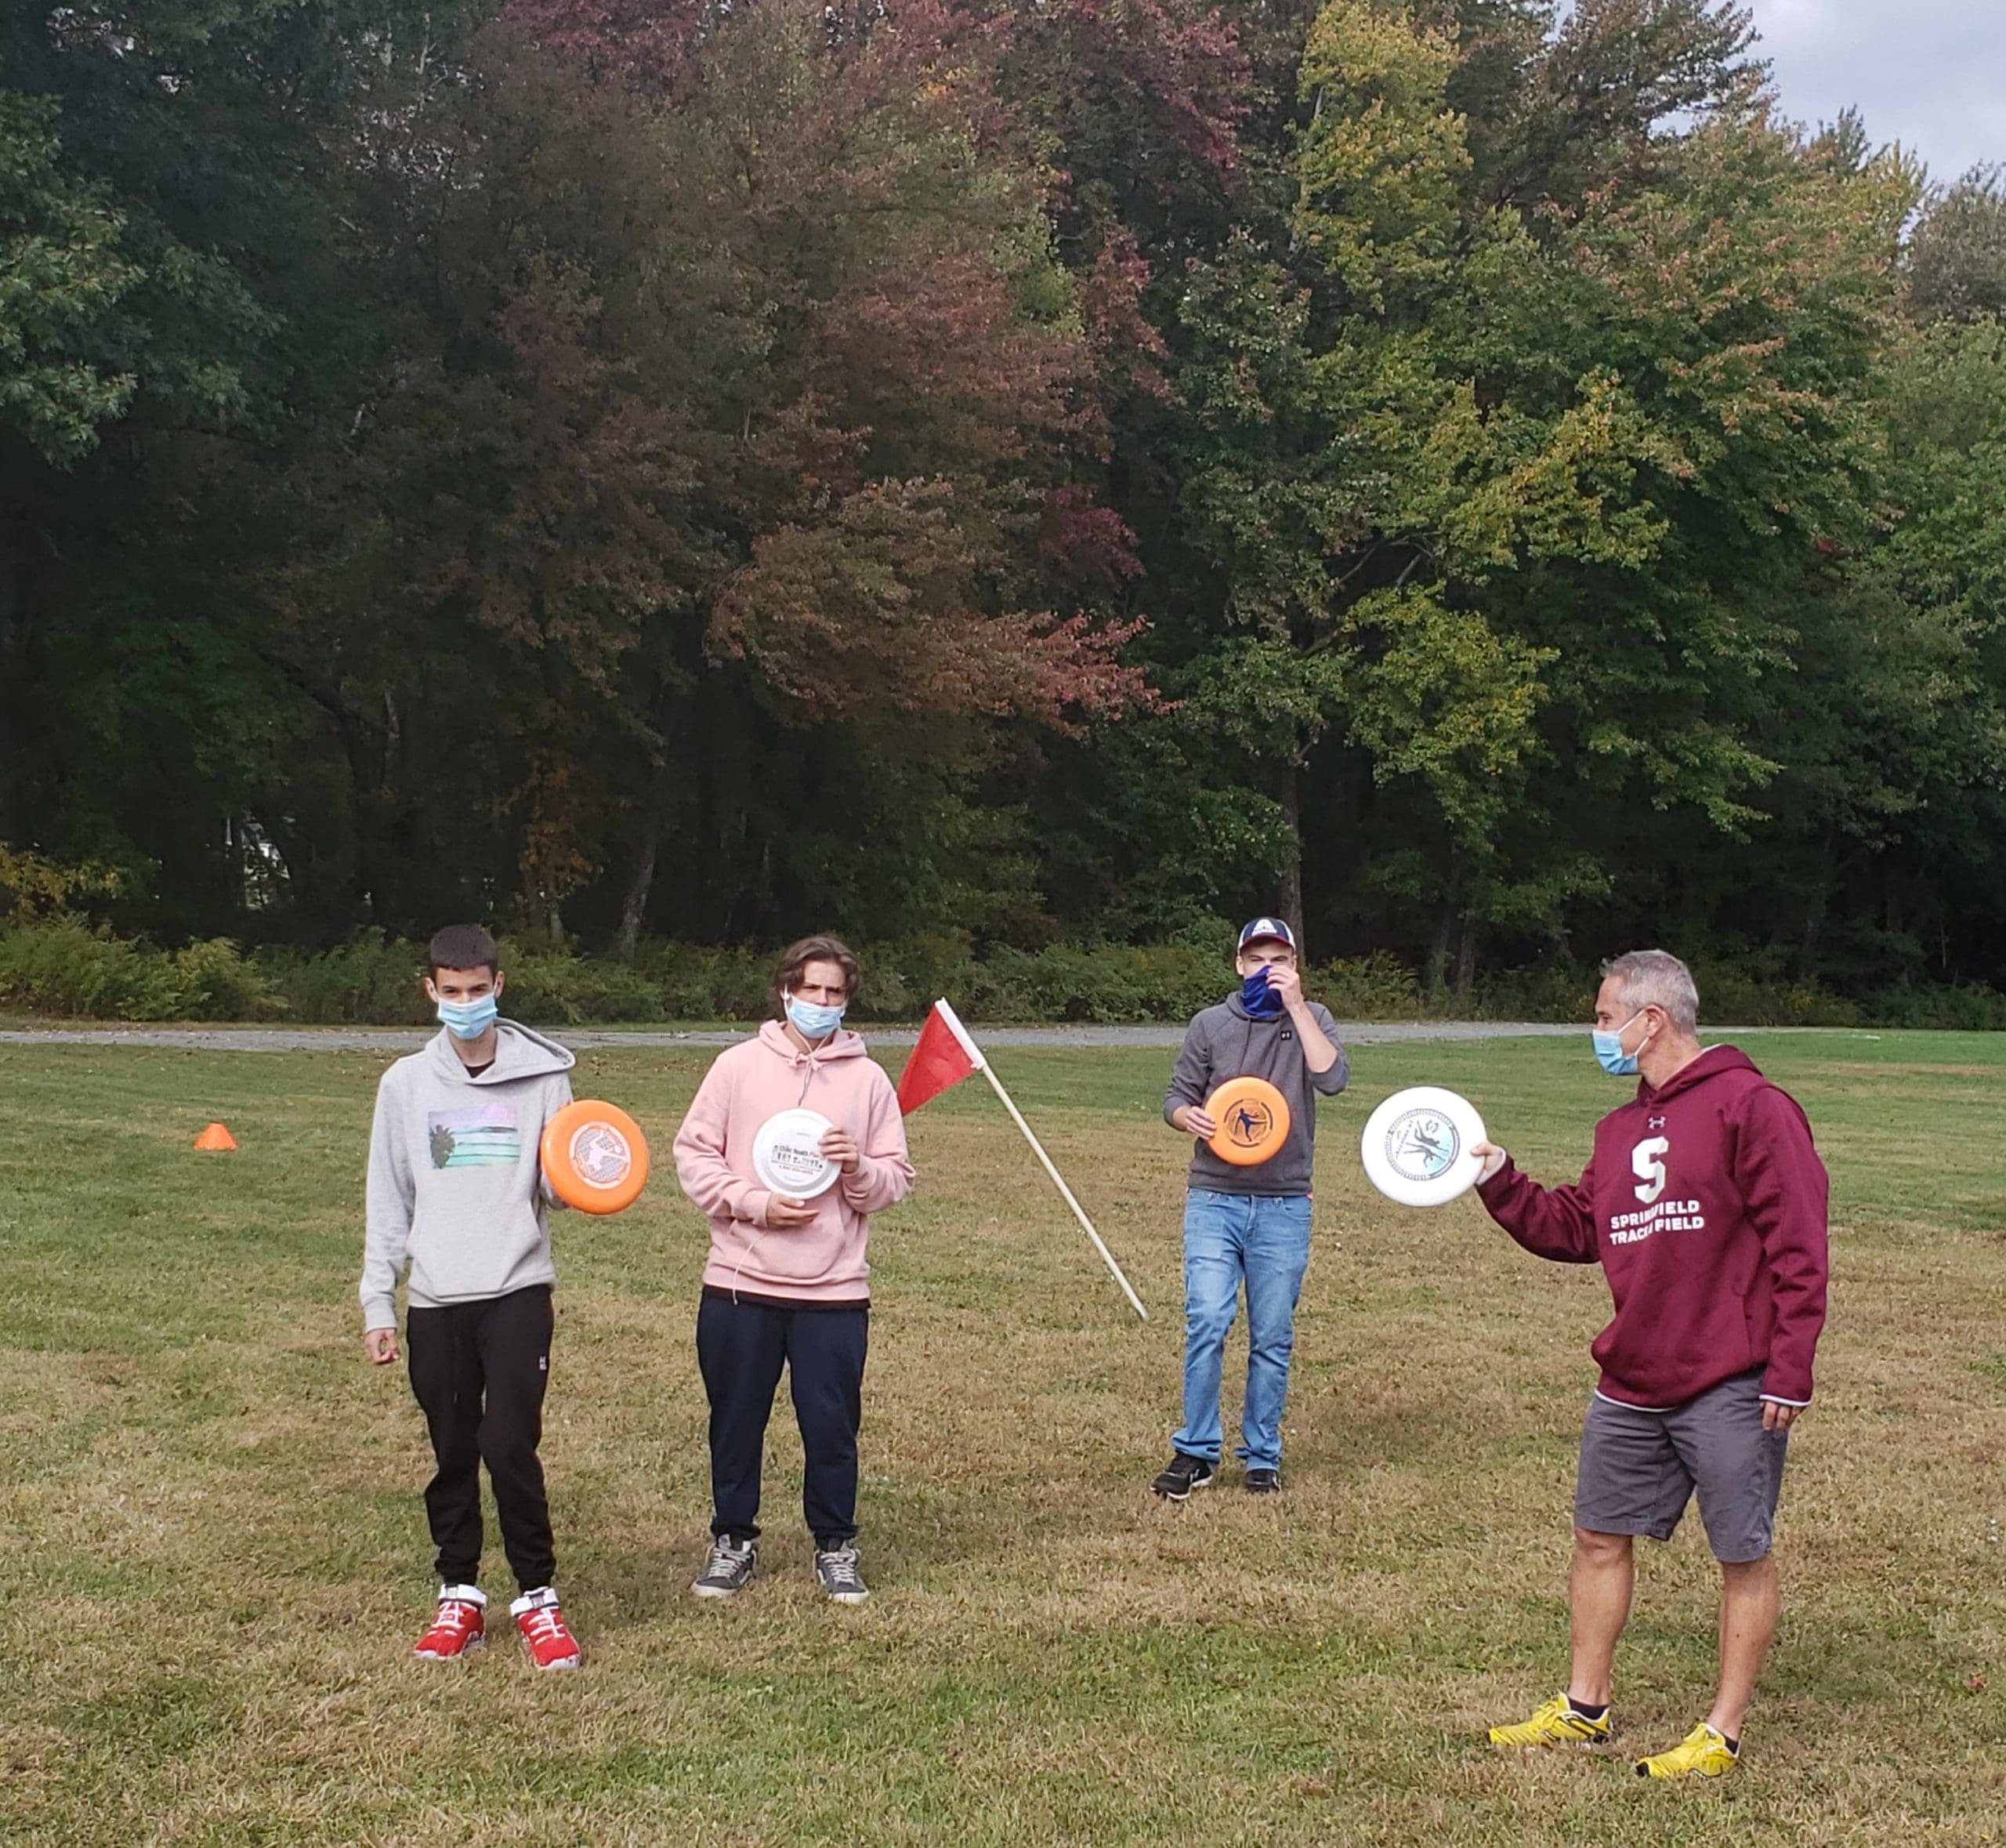 students playing frisbee golf